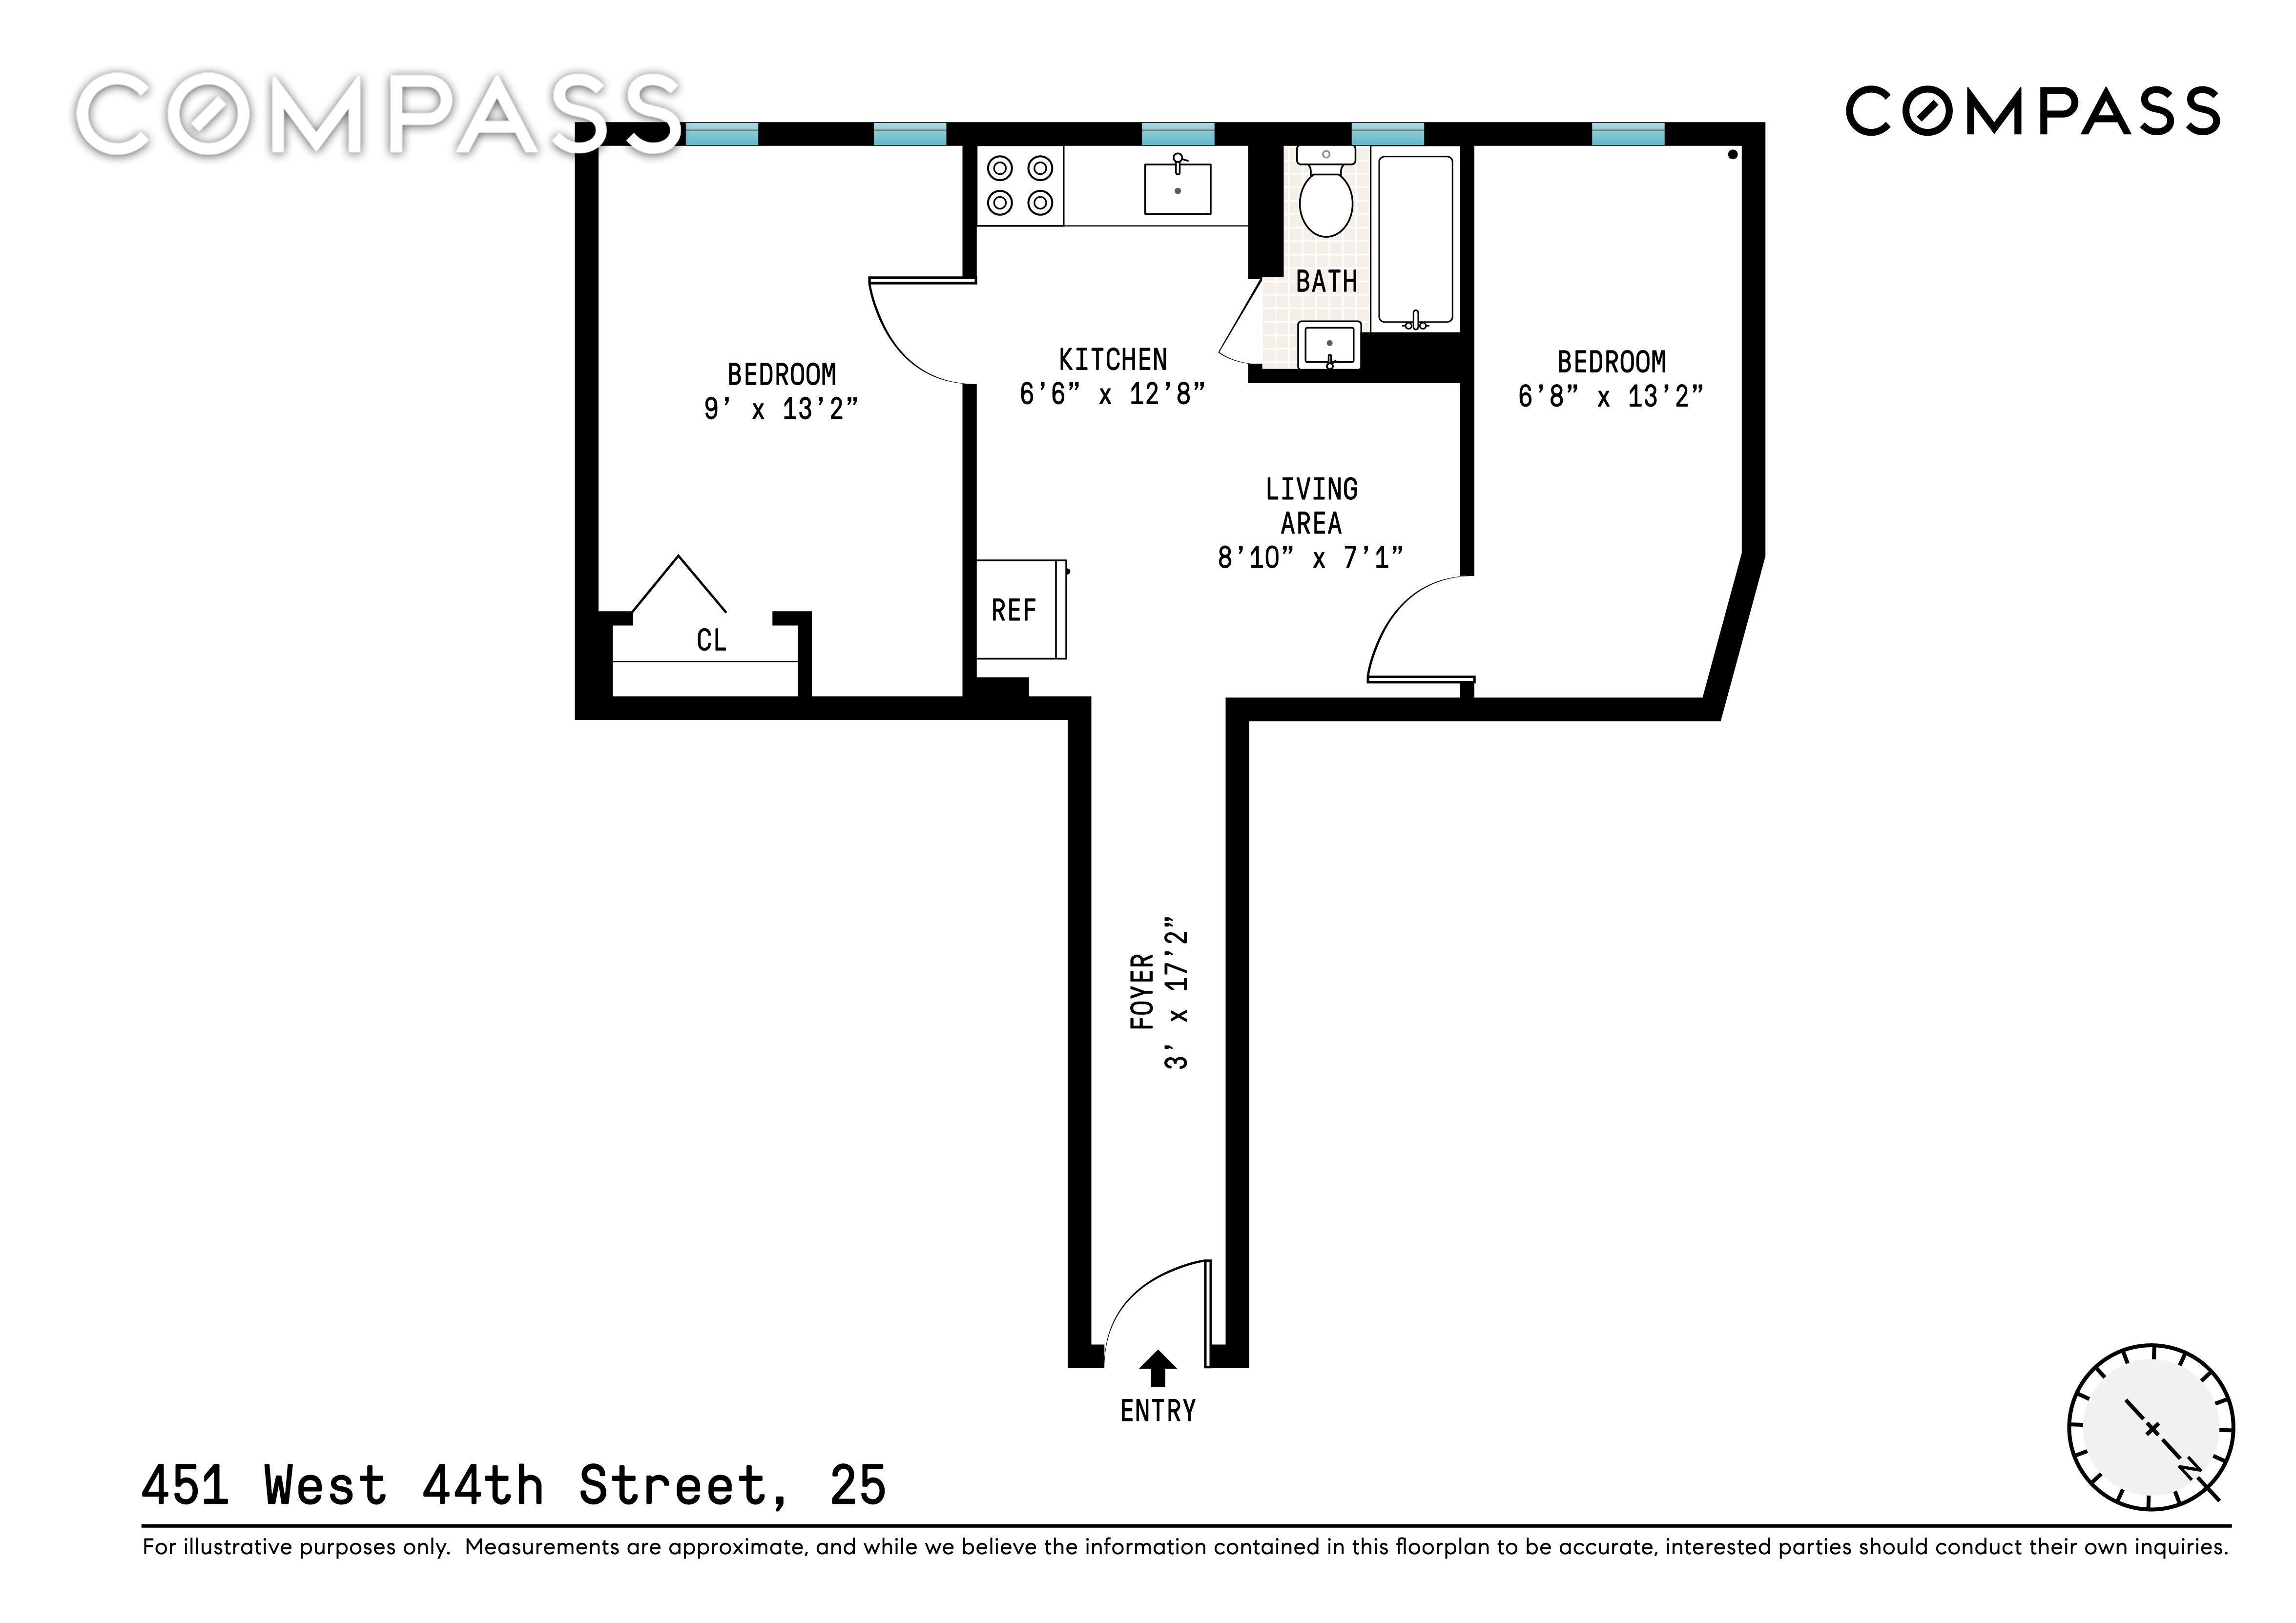 451 West 44th Street 25, Hell S Kitchen, Midtown West, NYC - 2 Bedrooms  
1 Bathrooms  
2 Rooms - 